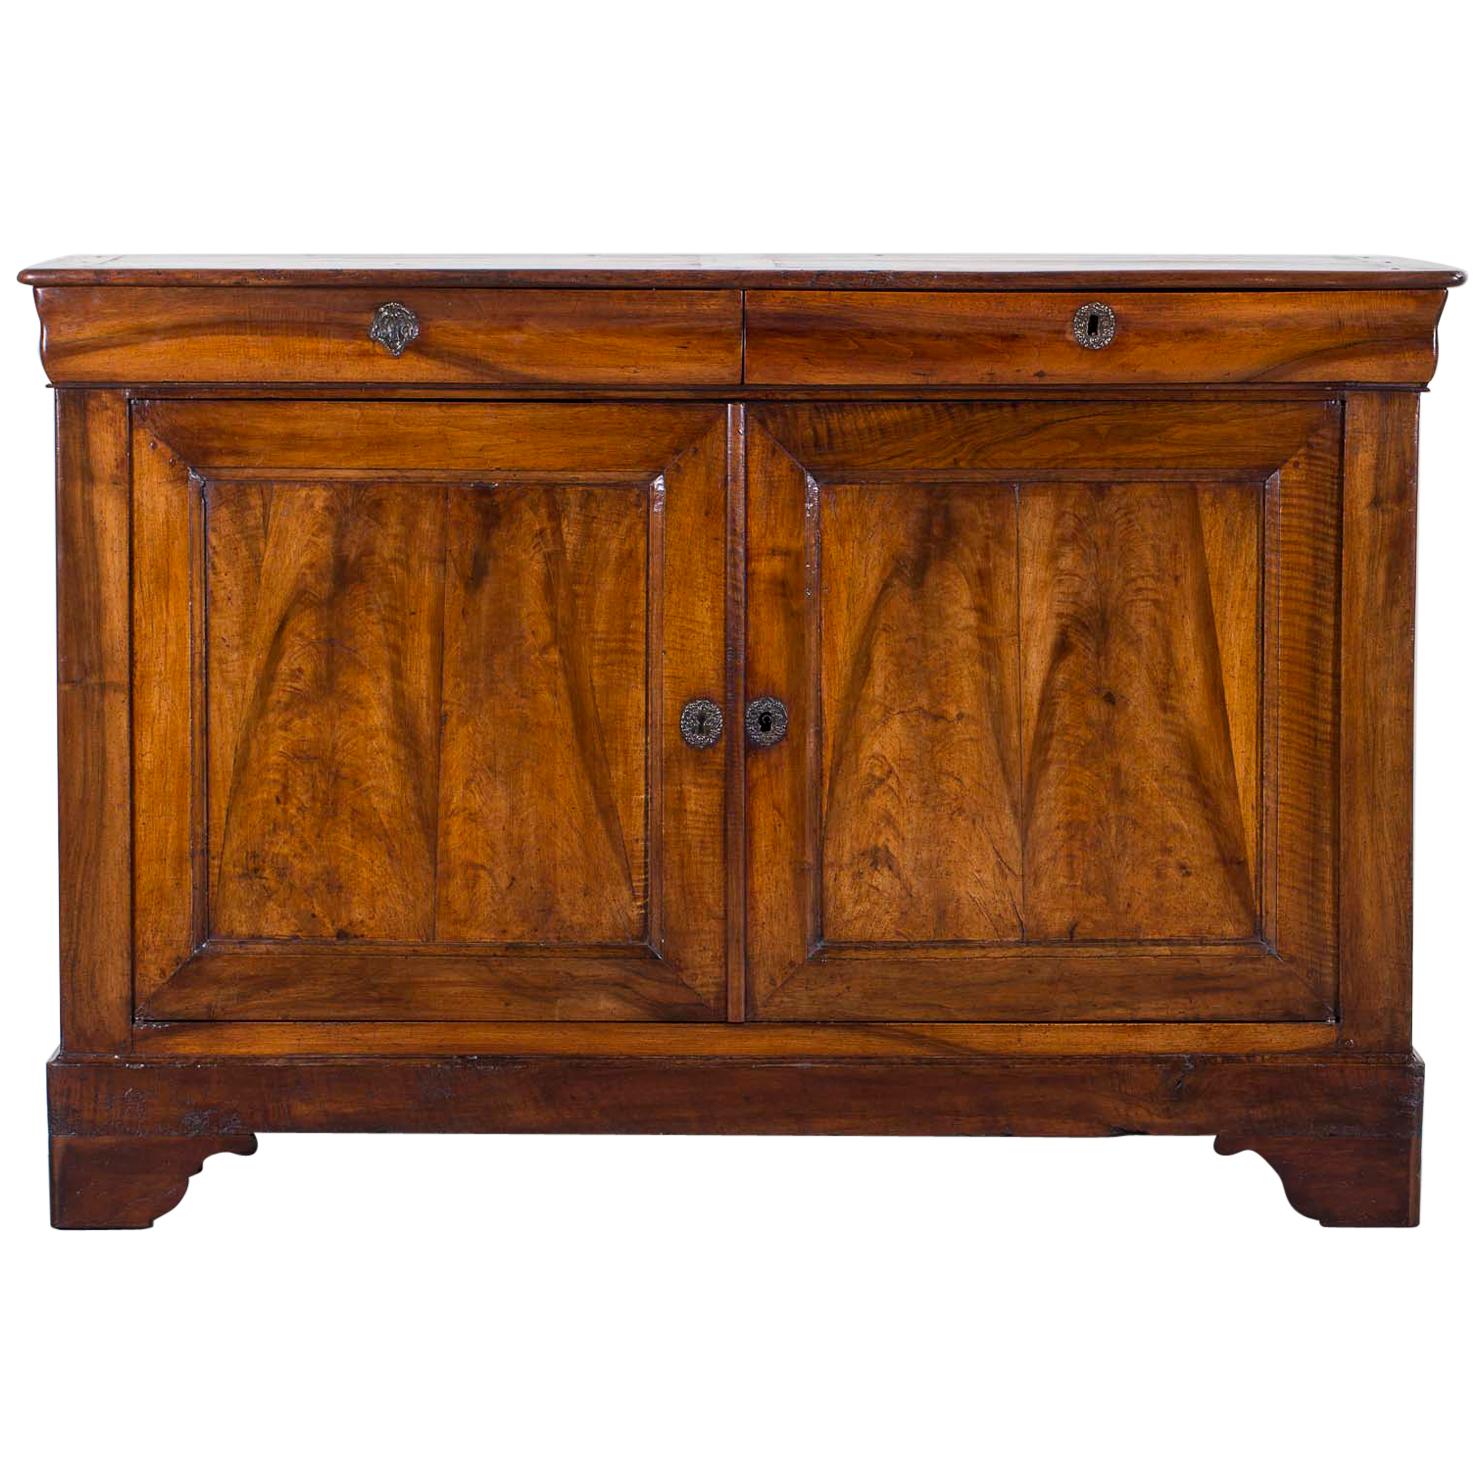 Antique French Louis Philippe Walnut Pine Buffet Credenza France, circa 1860